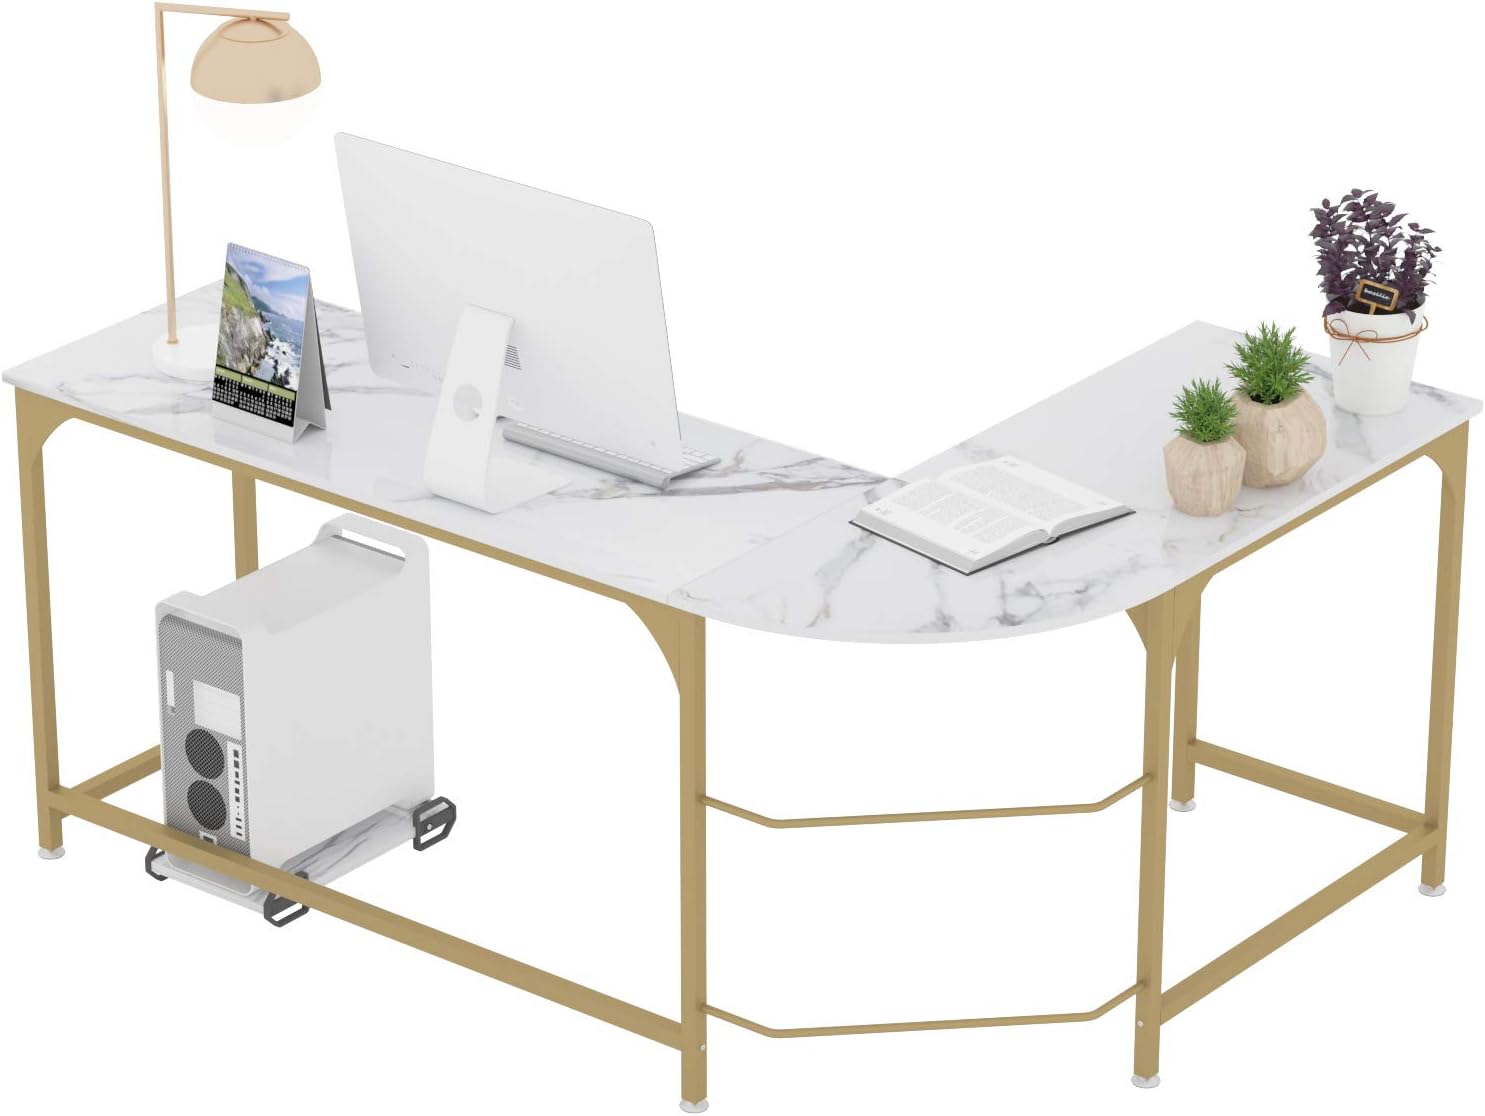 IF YOU ARE LOOKING FOR A DESK TO STAND OUT AND STAR IN ANY ROOM PLEASE BUY THIS AMAZINGLY BEAUTIFUL DESK. ITS HUGE, PLENTY OF ROOM, STURDY AND EASY TO ASSEMBLE. I RECOMMEND THIS DESK AND AM PROUD TO SAY SO. SO BUY ONE OR MORE...lol... YOU WONT BE DISSAPOINTED.